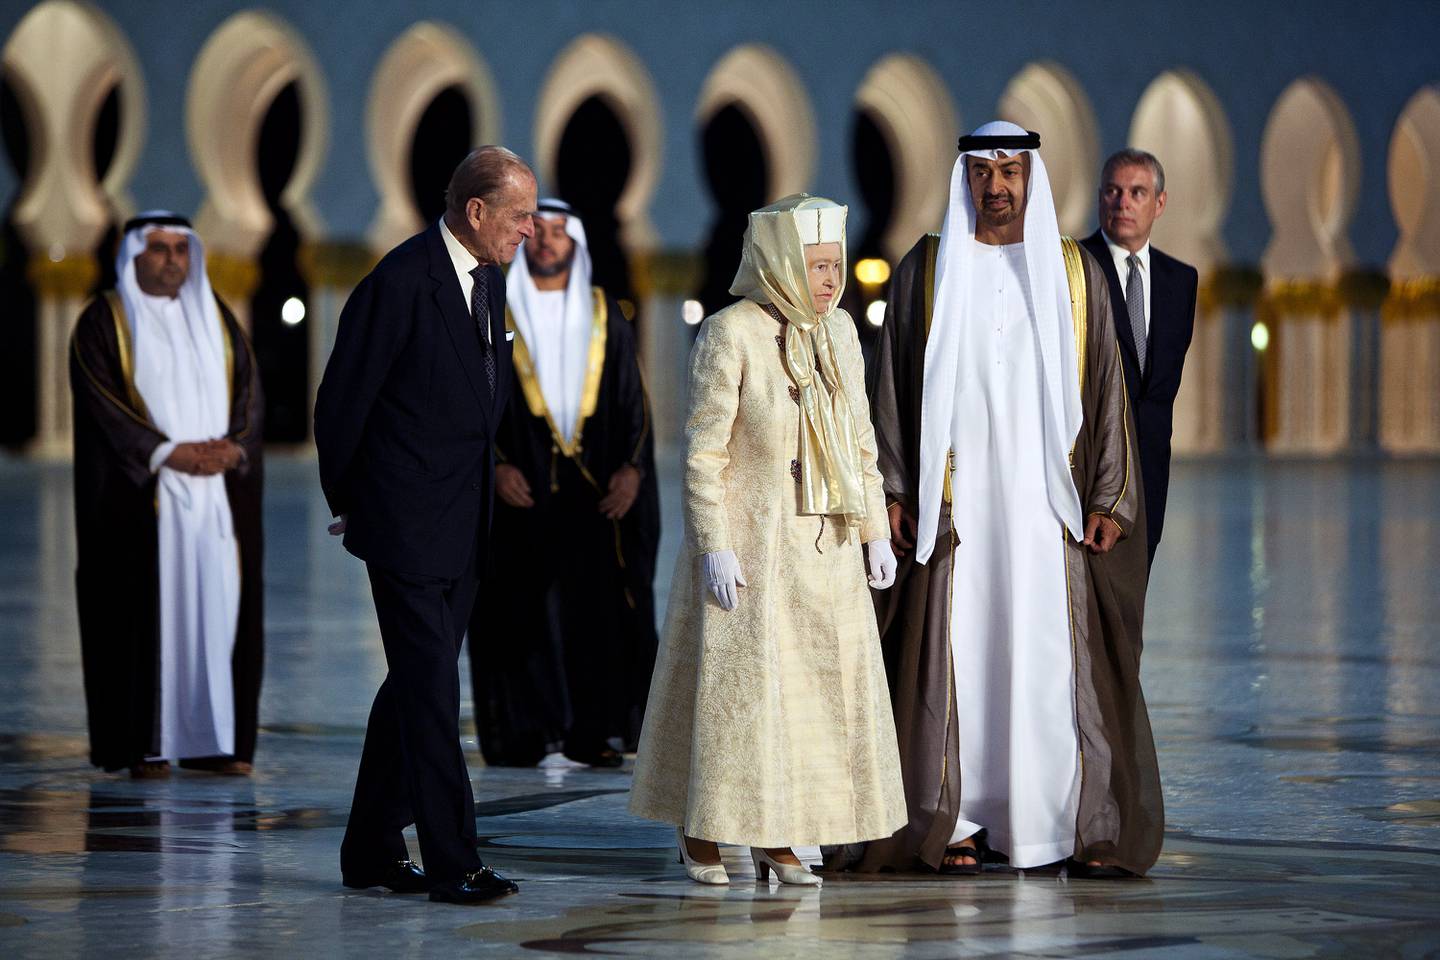 Queen Elizabeth II and her husband Prince Philip, the Duke of Edinburgh, arrive at Sheikh Zayed Grand Mosque with Sheikh Mohamed bin Zayed, Crown Prince of Abu Dhabi at the time, and Prince Andrew, the Duke of York, in November  2010. Andrew Henderson / The National